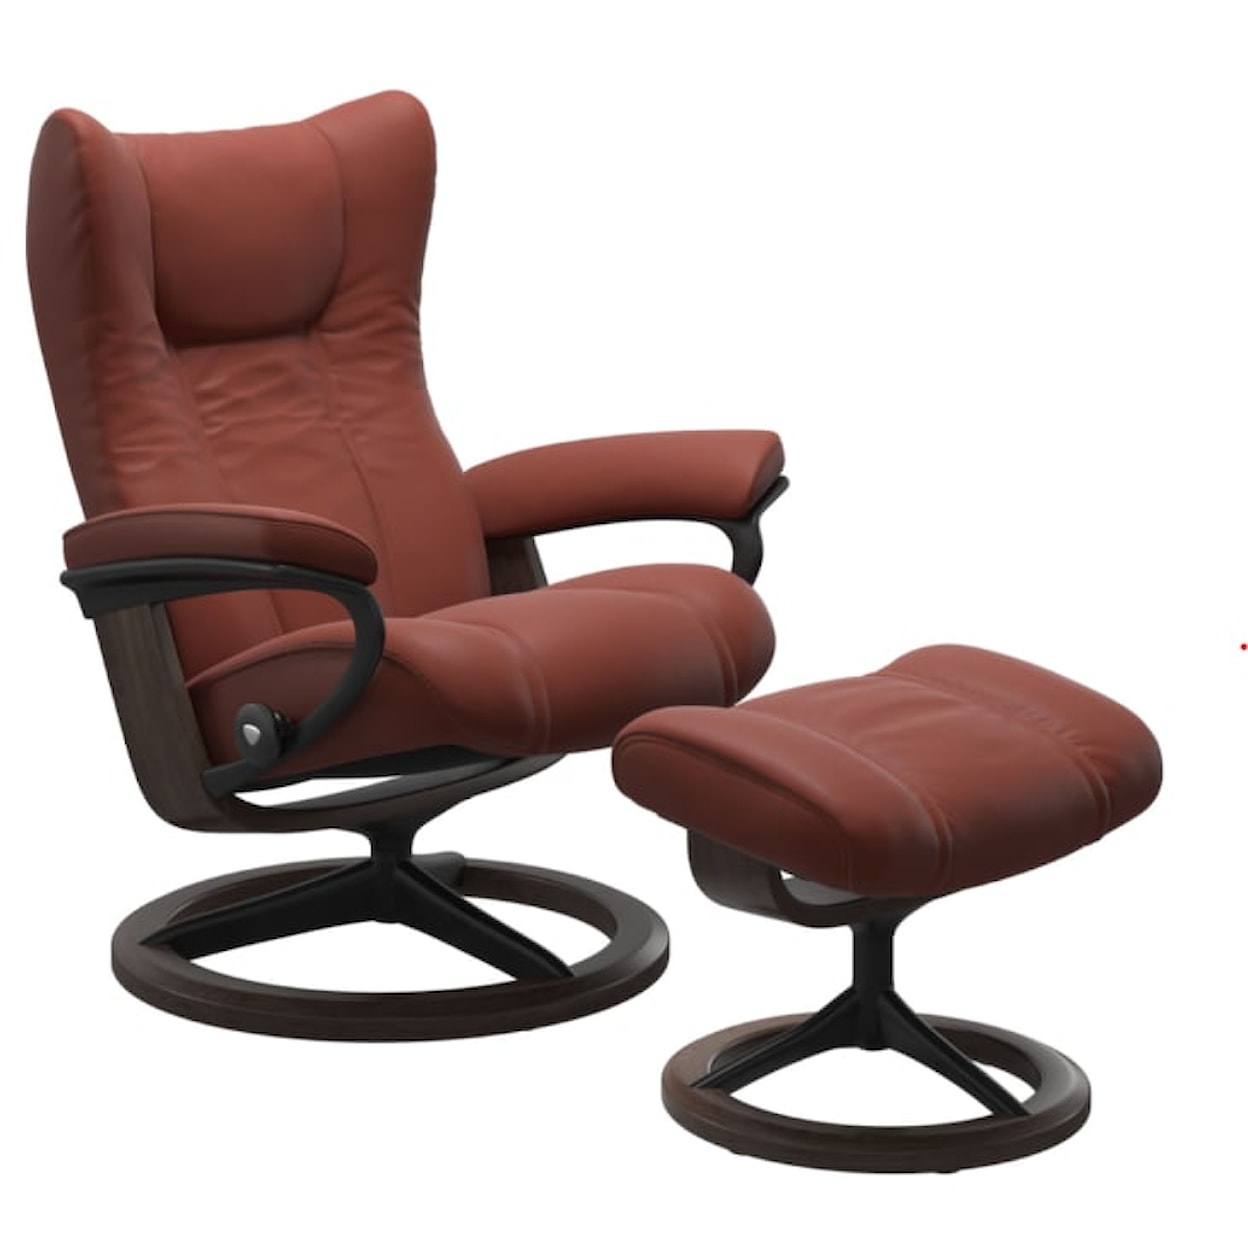 Stressless by Ekornes Wing Large Reclining Chair and Ottoman